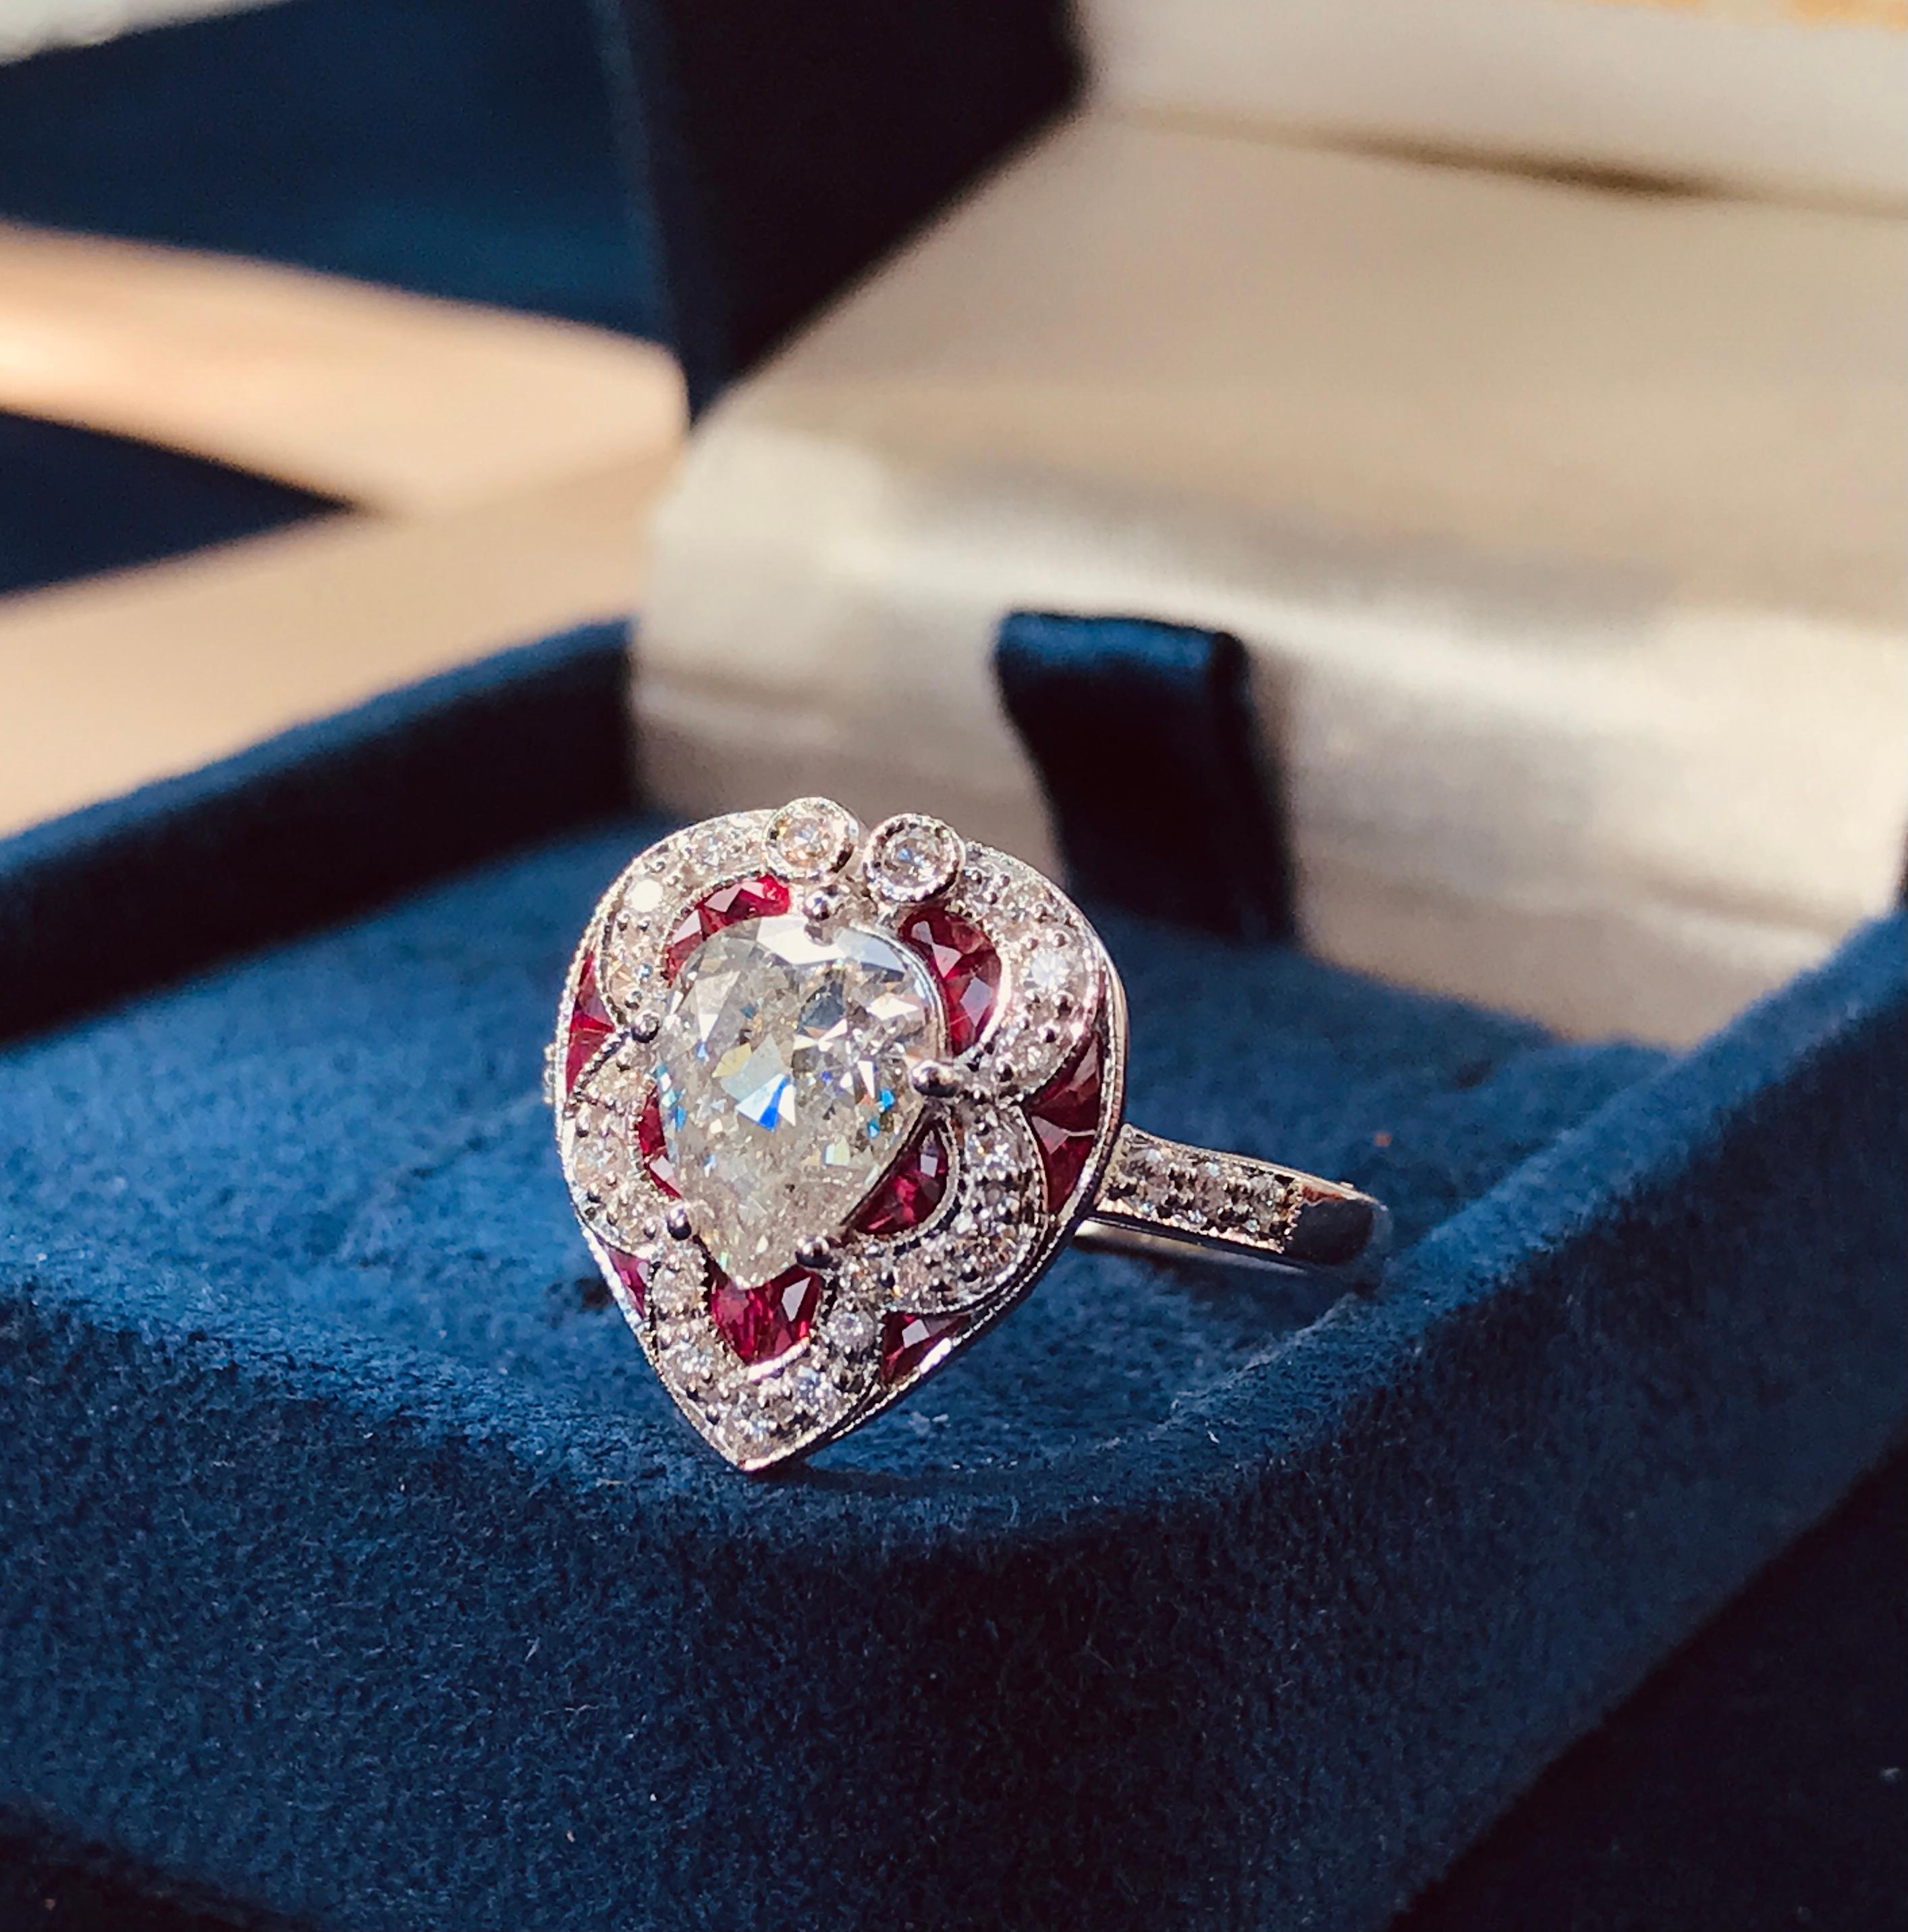 Centering a sparkling pear shape diamond weighing 1.05 ct. (I color, I1 clarity), framed by French cut rubies and additionally set with twenty-seven round diamond weighing approx. 0.23 carat weight, fashioned in 18k white gold.

Ring